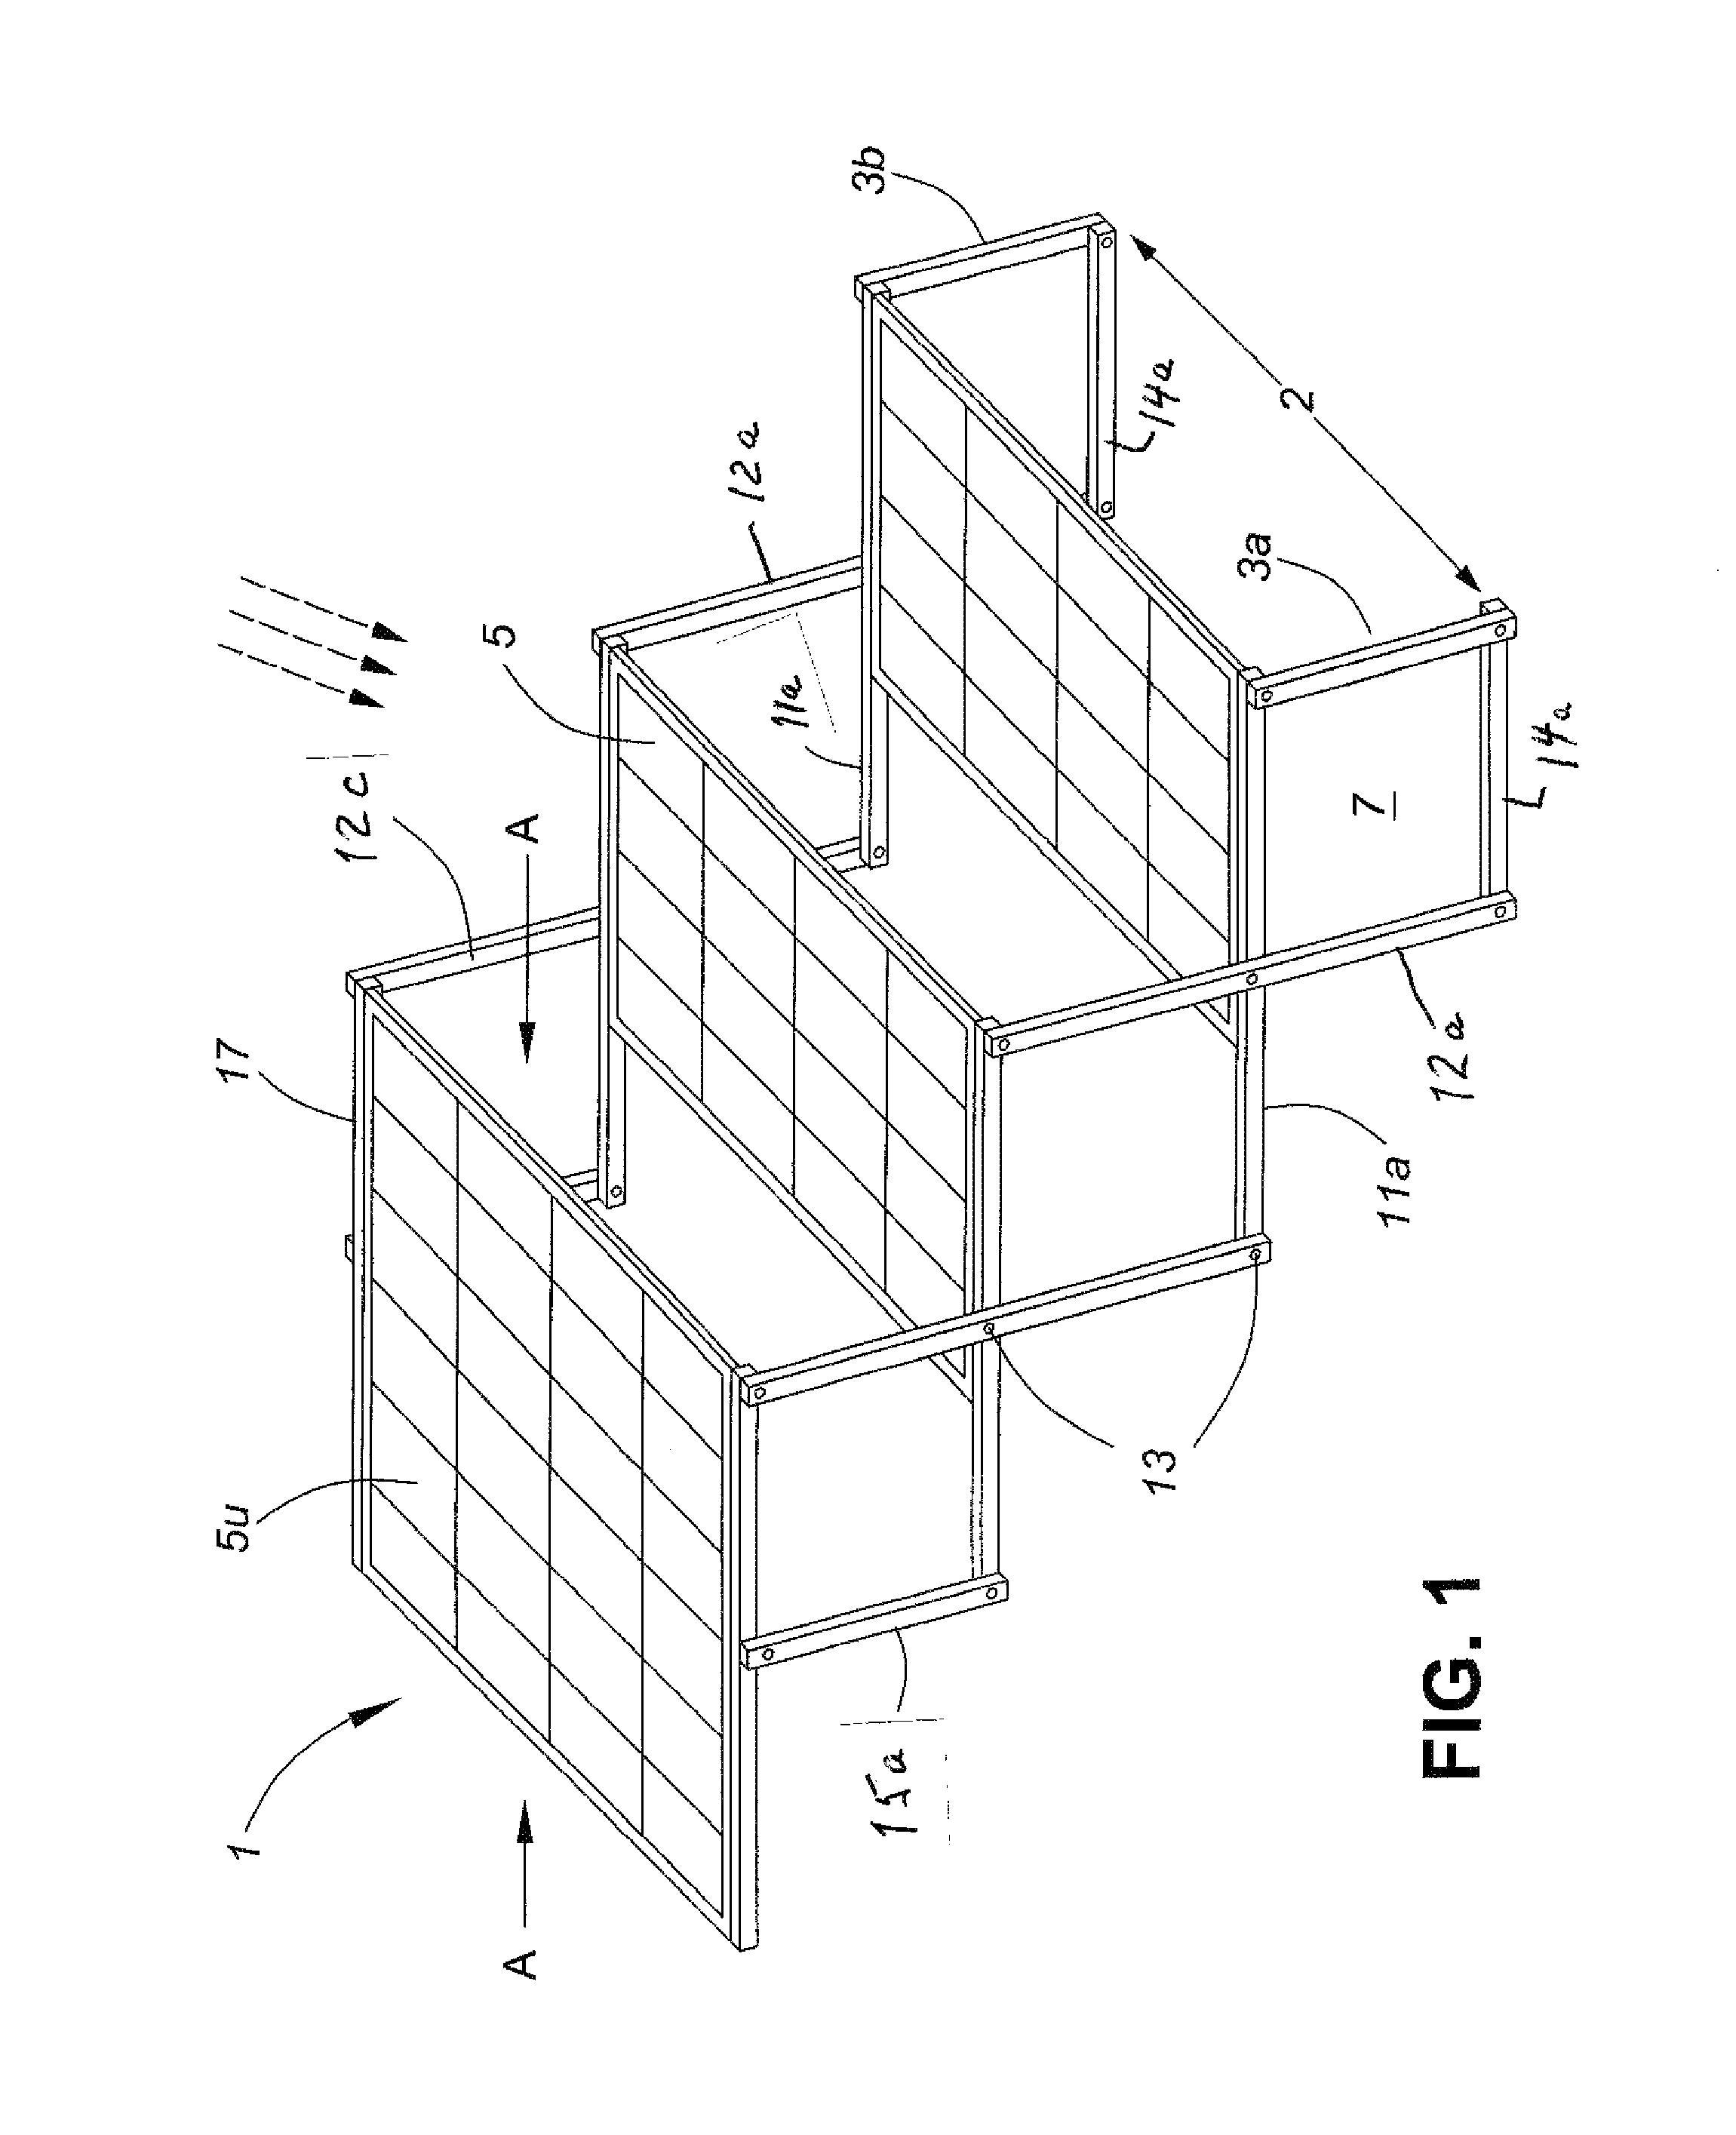 Deployable photovoltaic array and collapsible support unit thereof